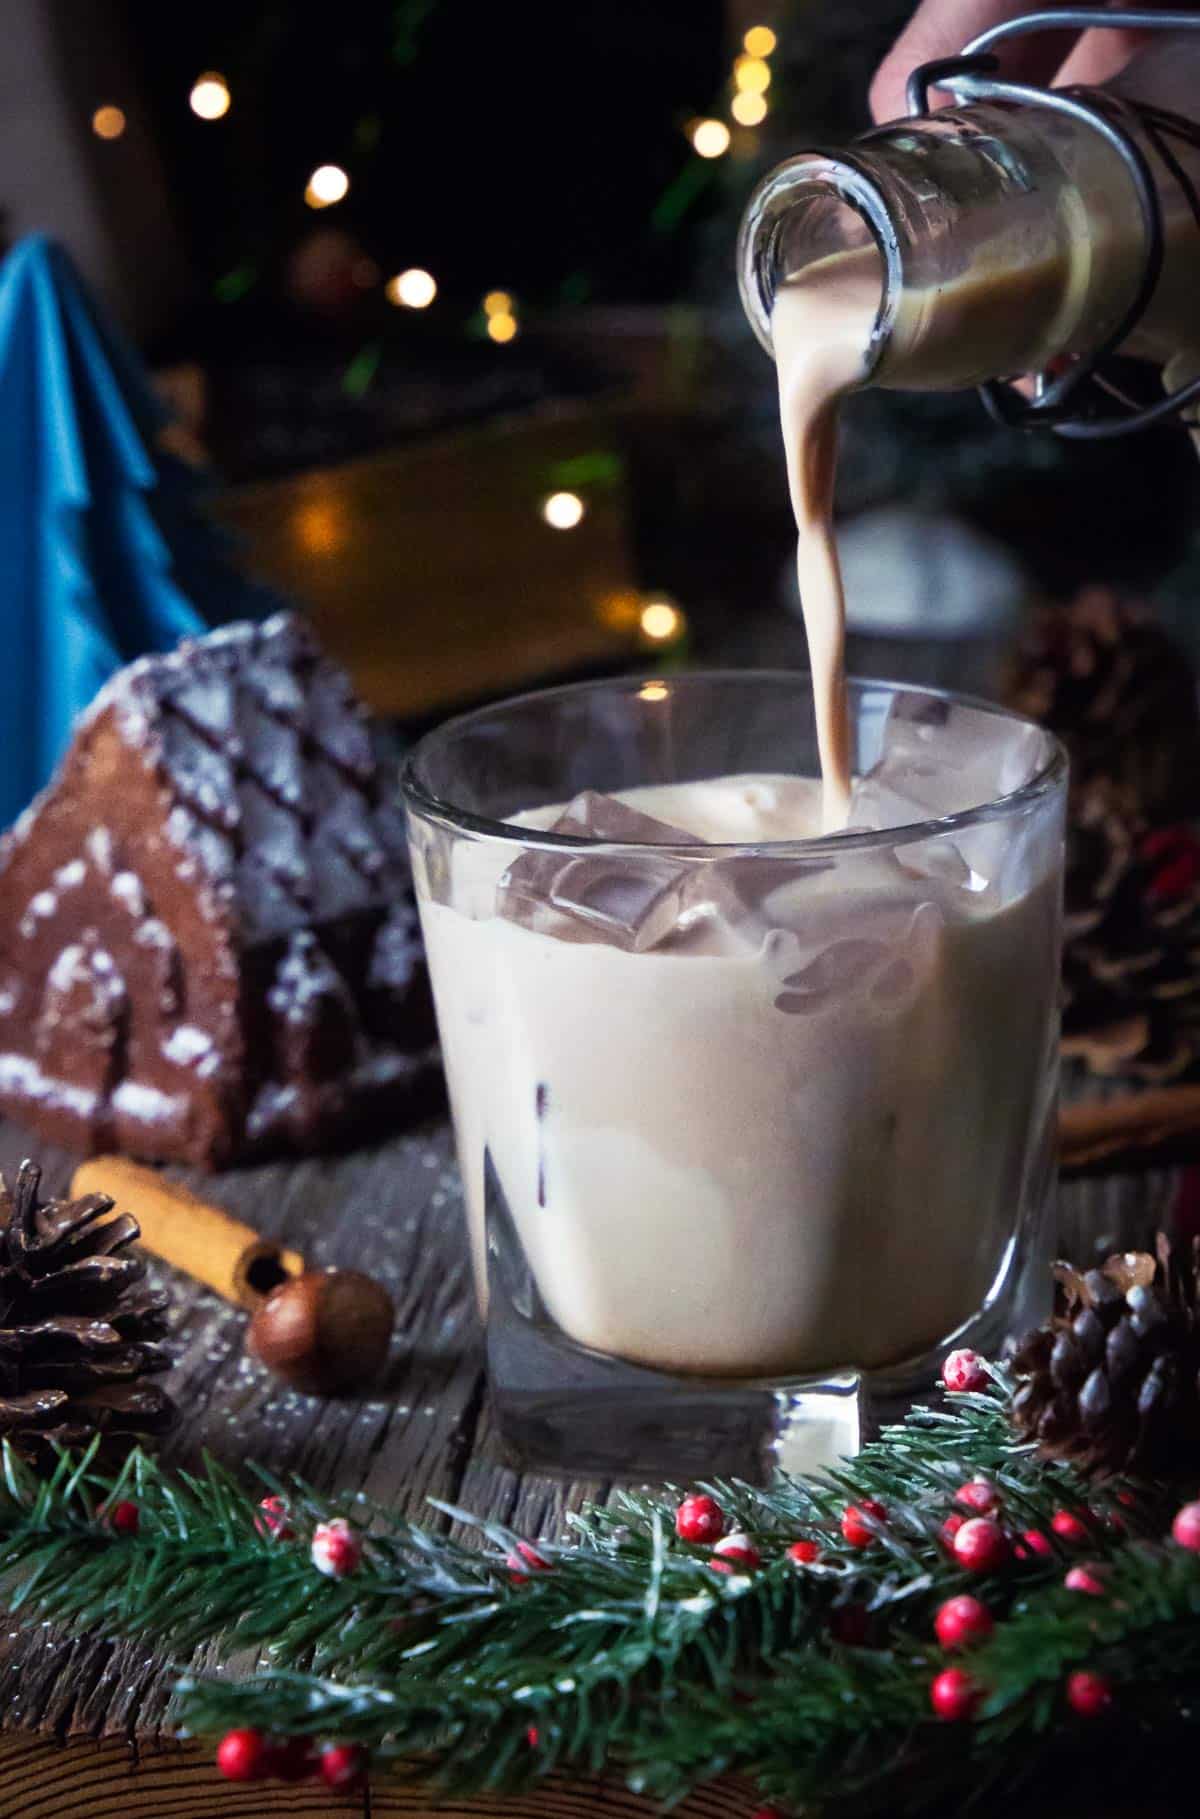 Pouring homemade Baileys into a glass over ice cubes.